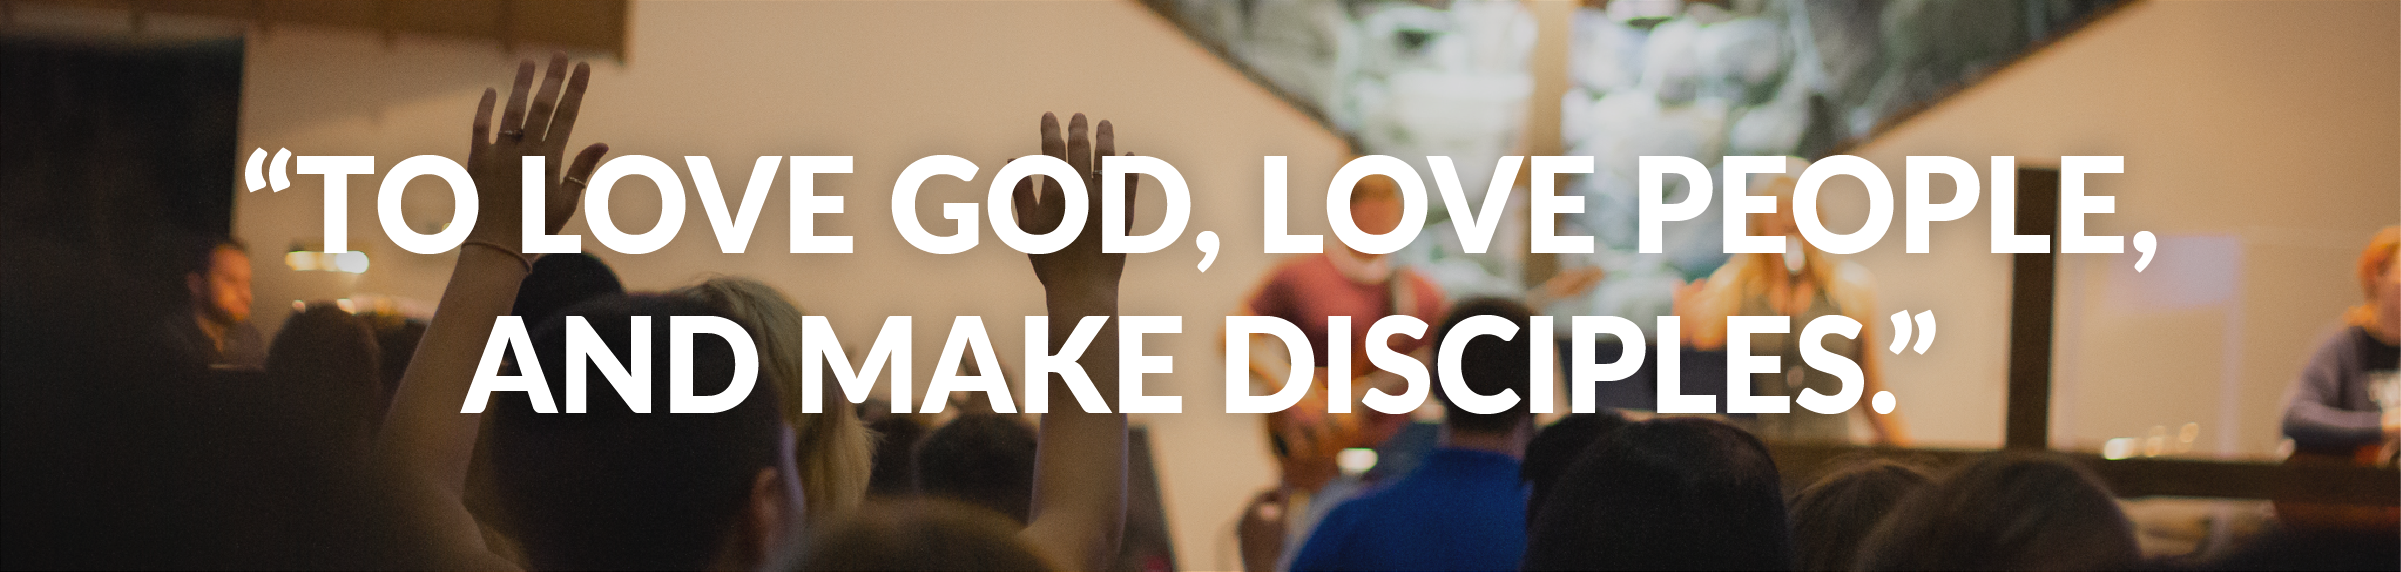 "Love God, love people, and make disciples"